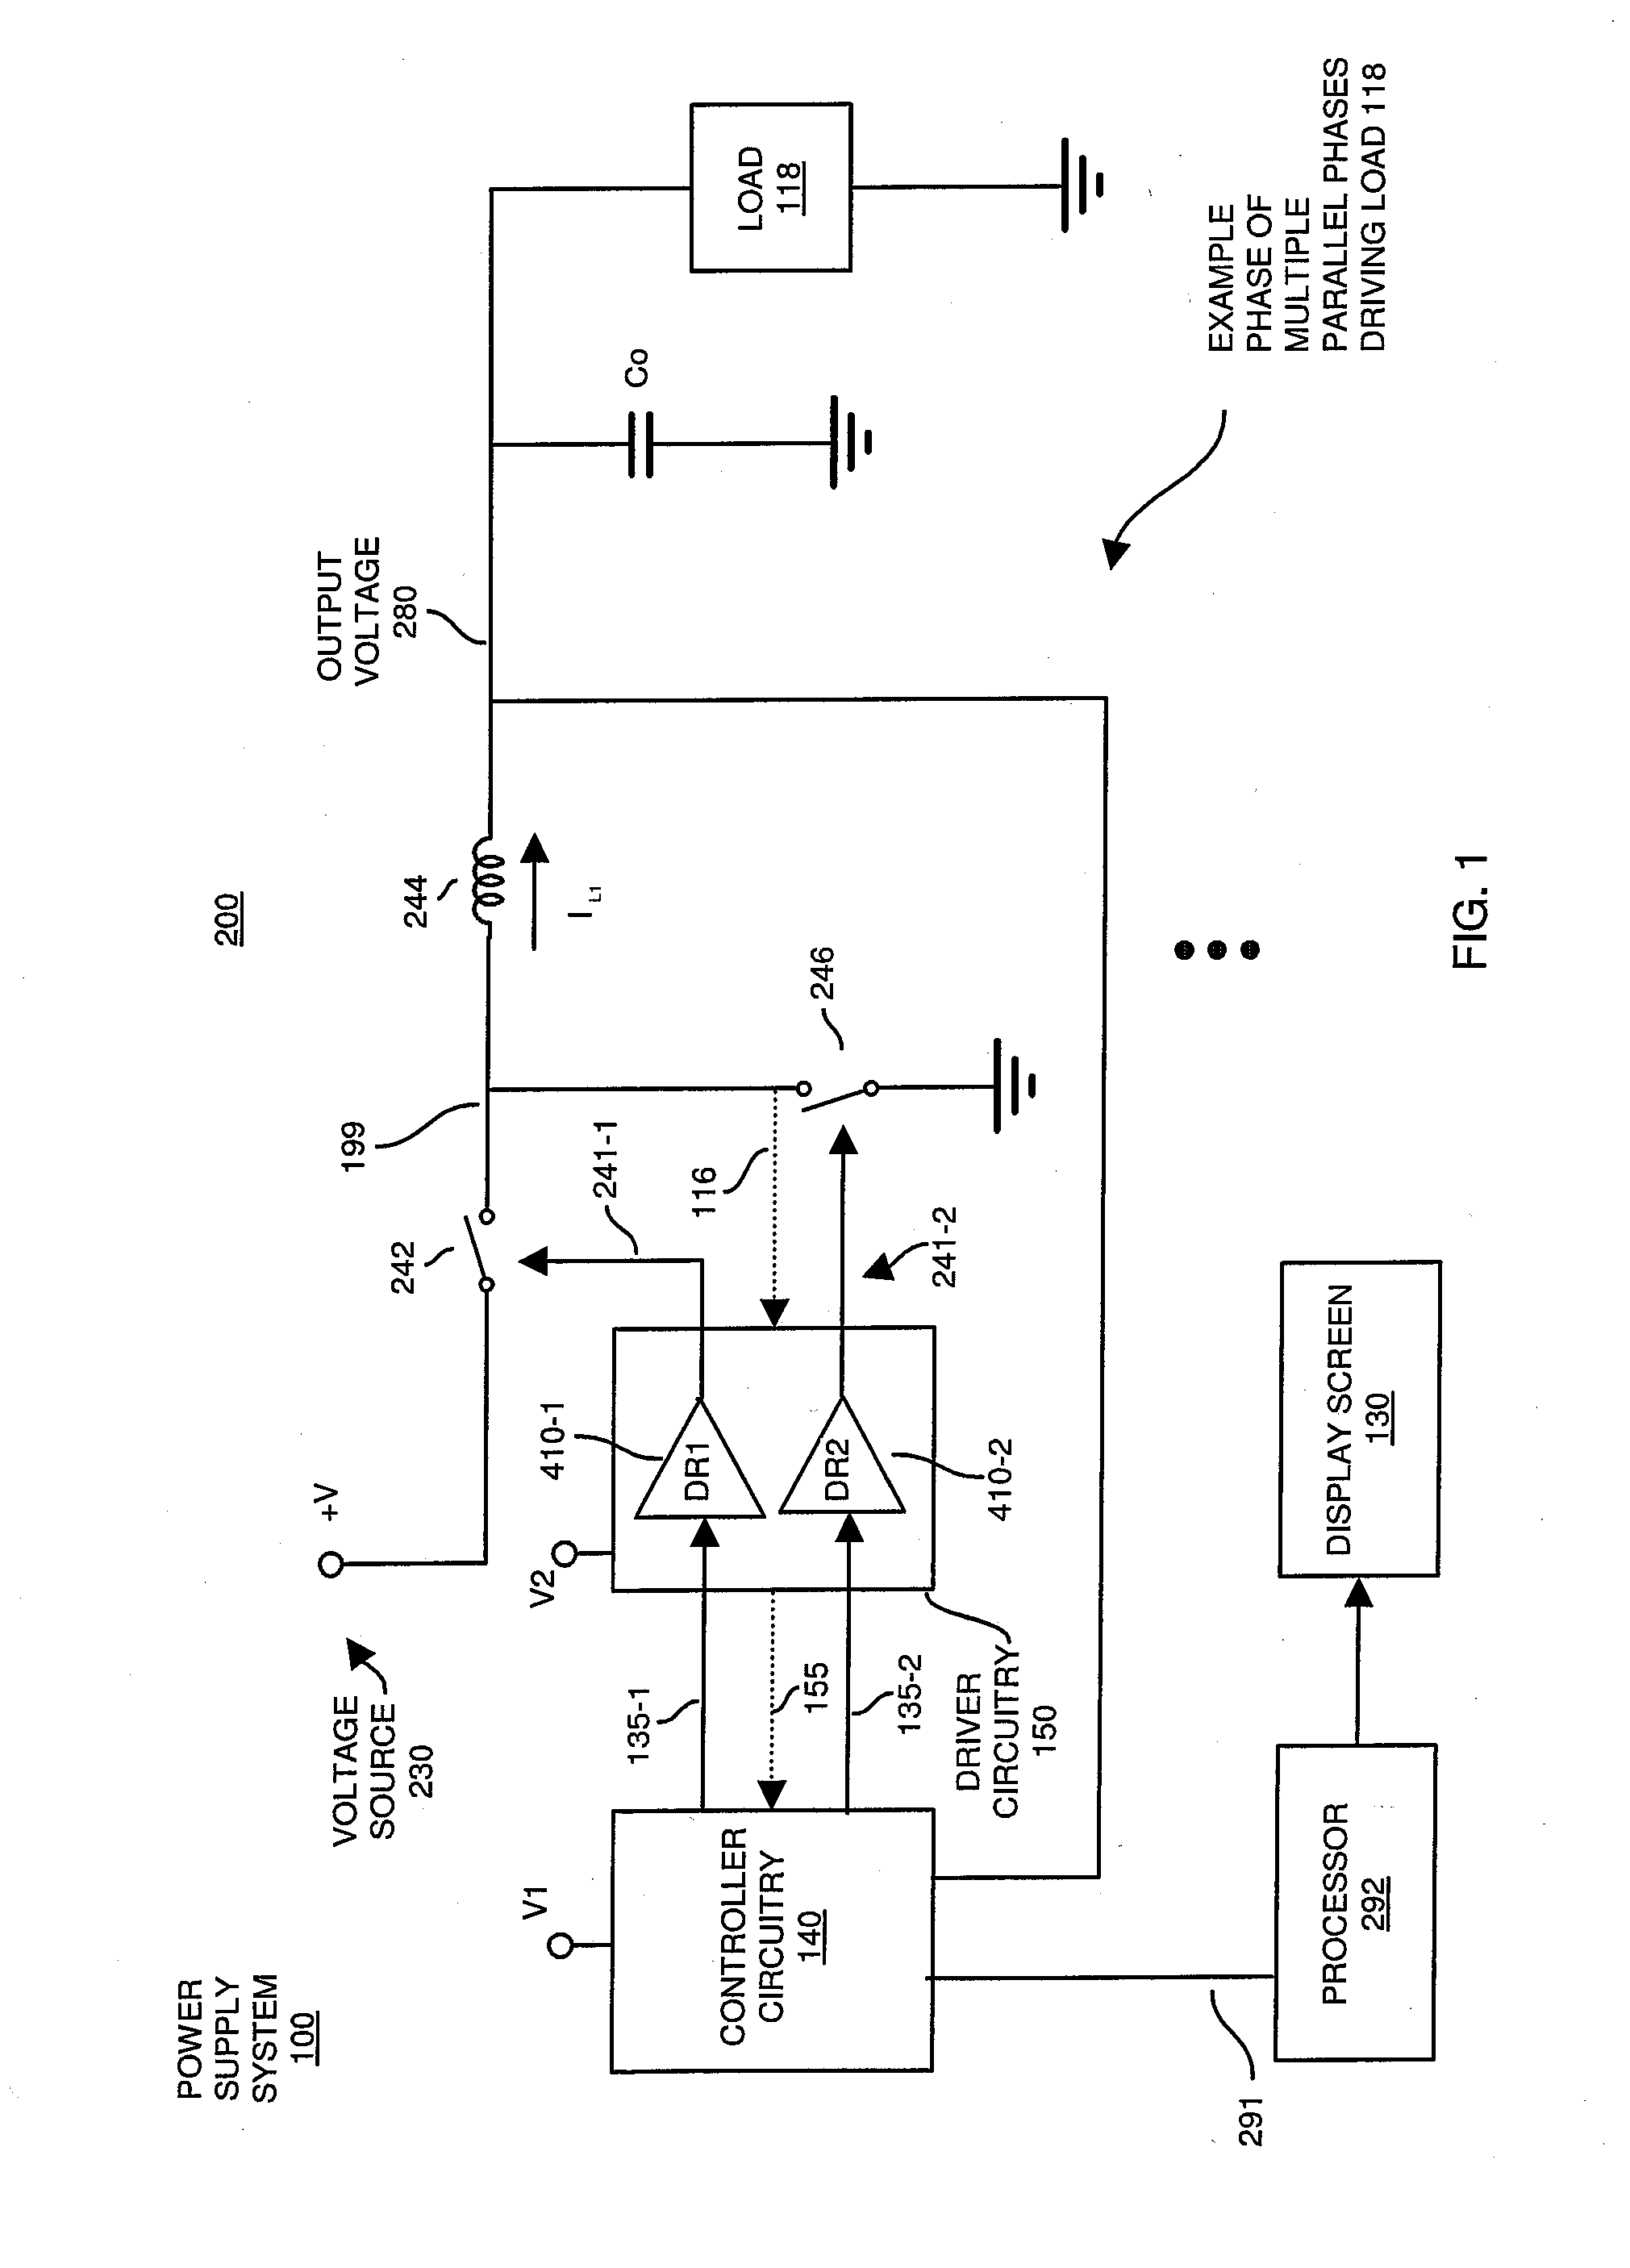 Circuit connectivity and conveyance of power status information